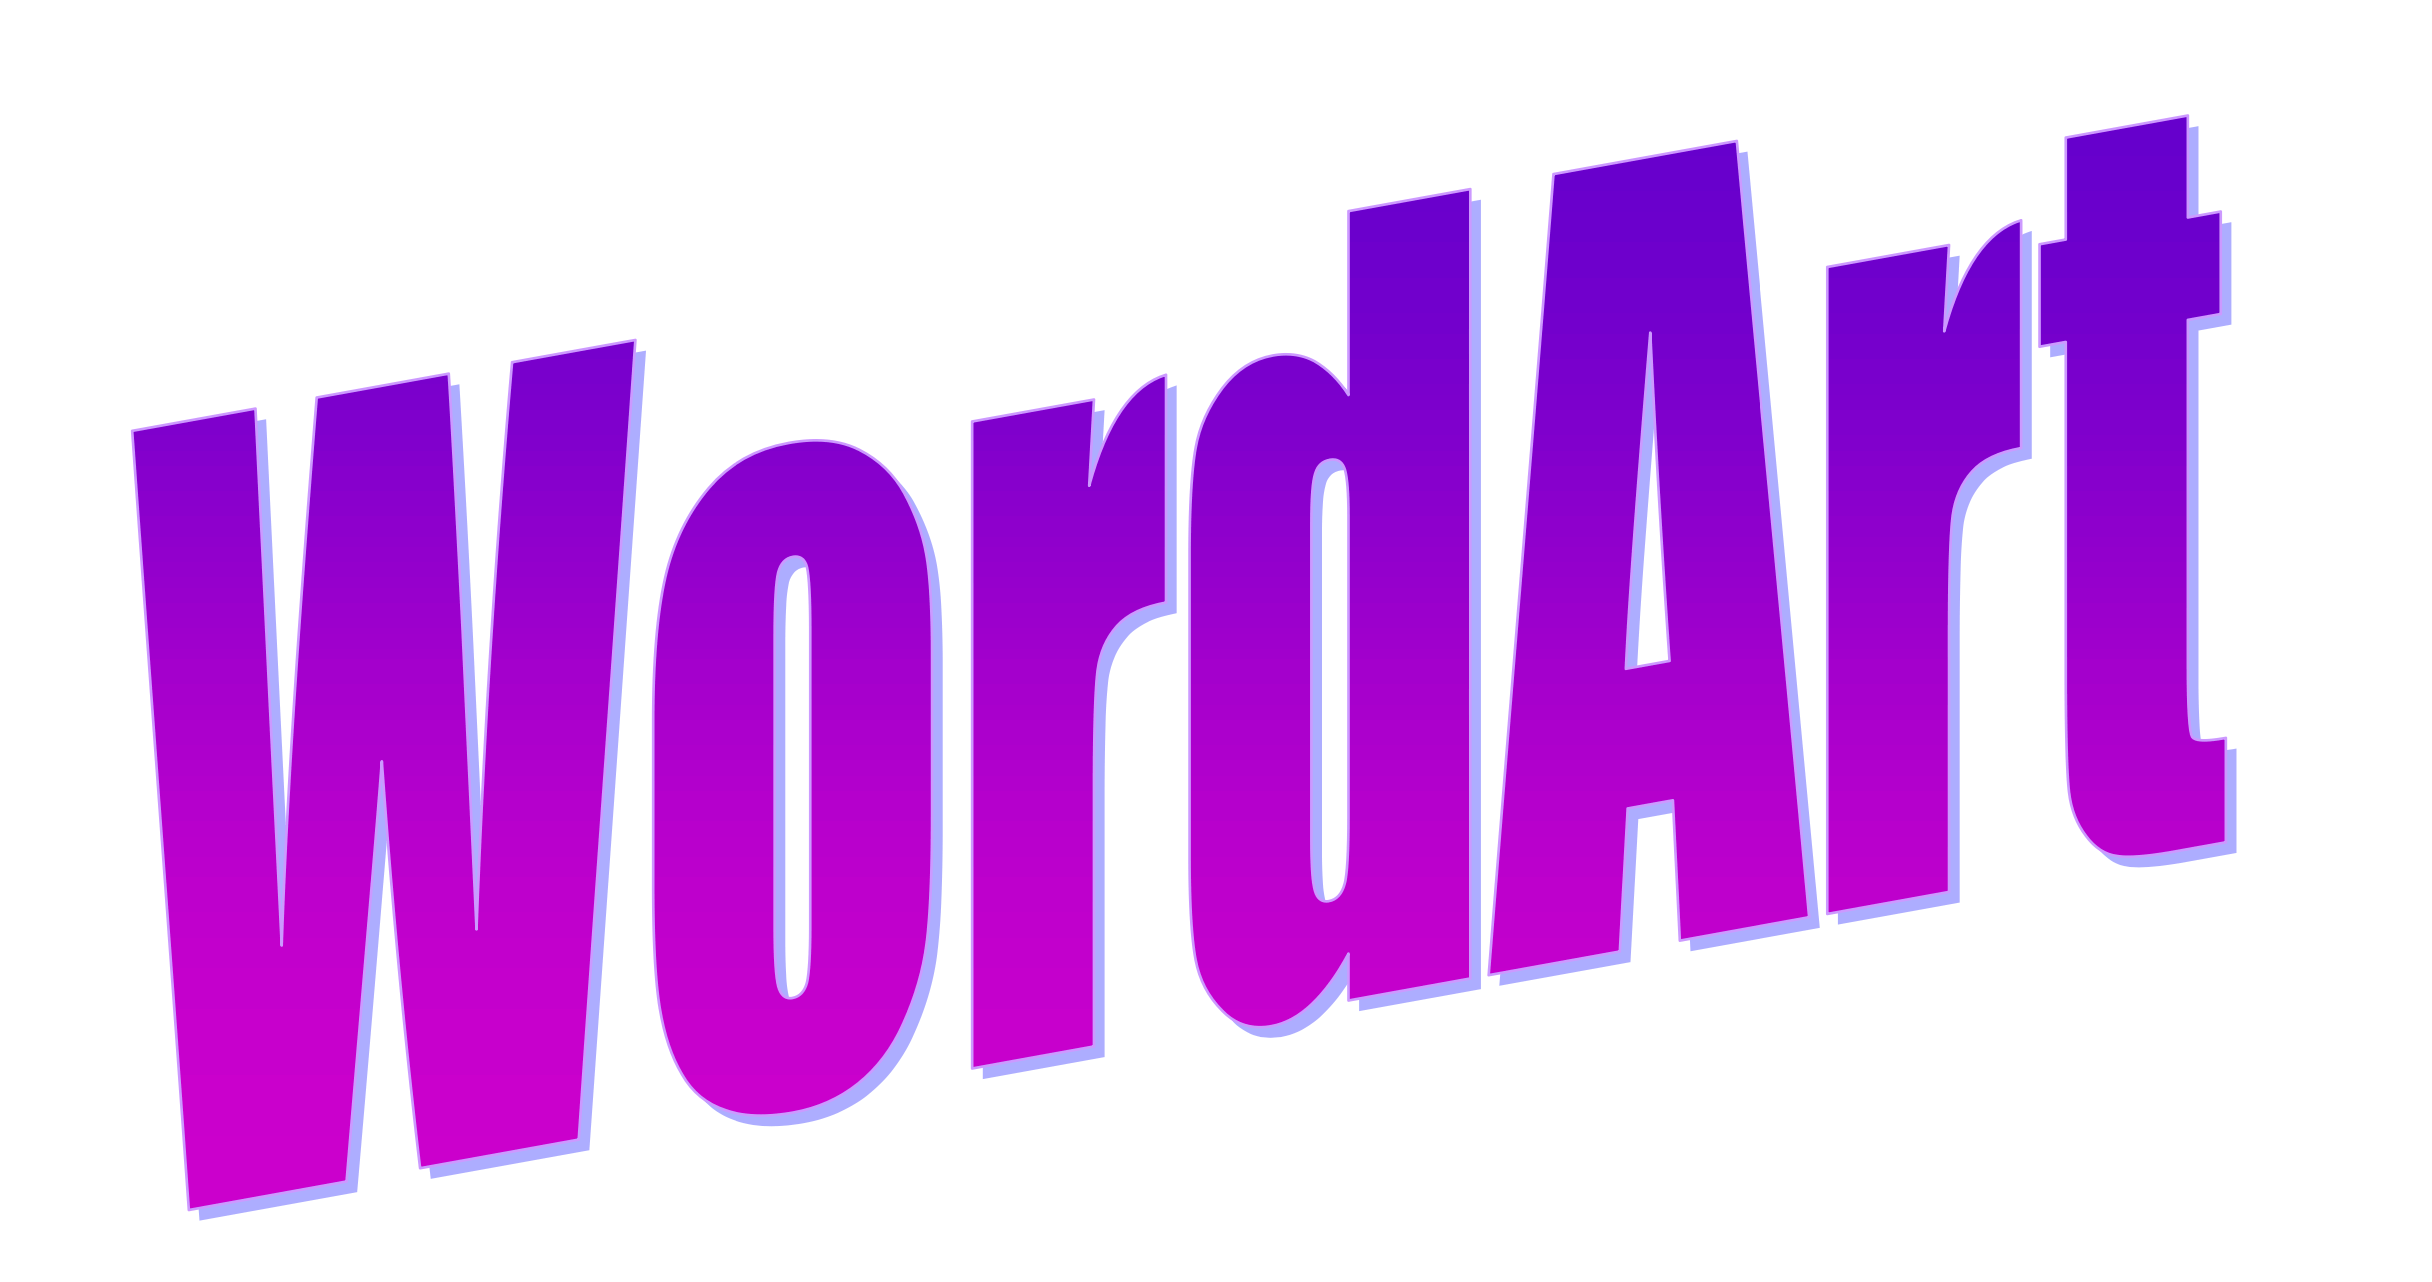 The word 'wordart' in Impact font, skewed to point up and to the right, filled in with a purple gradient and a light purple drop shadow